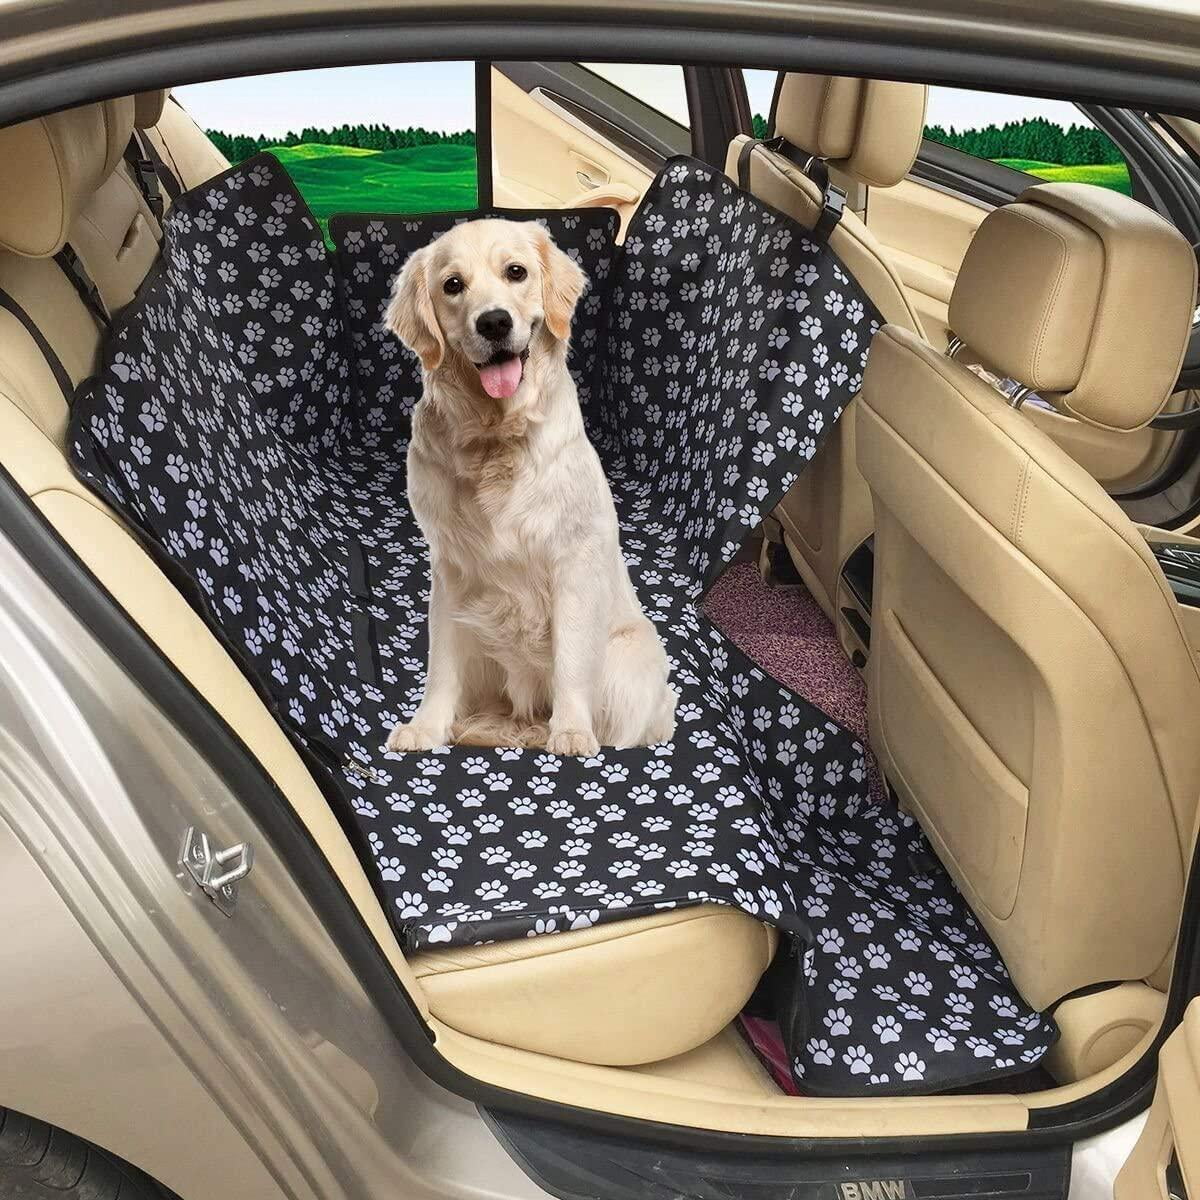 Fashion Oxford Pet Car Seat Colorful Cannabis Leaf Design Style Natural Vintage Elements Waterproof Nonslip Canine Pet Dog Bed Hammock Convertible for Cars Trucks SUV 